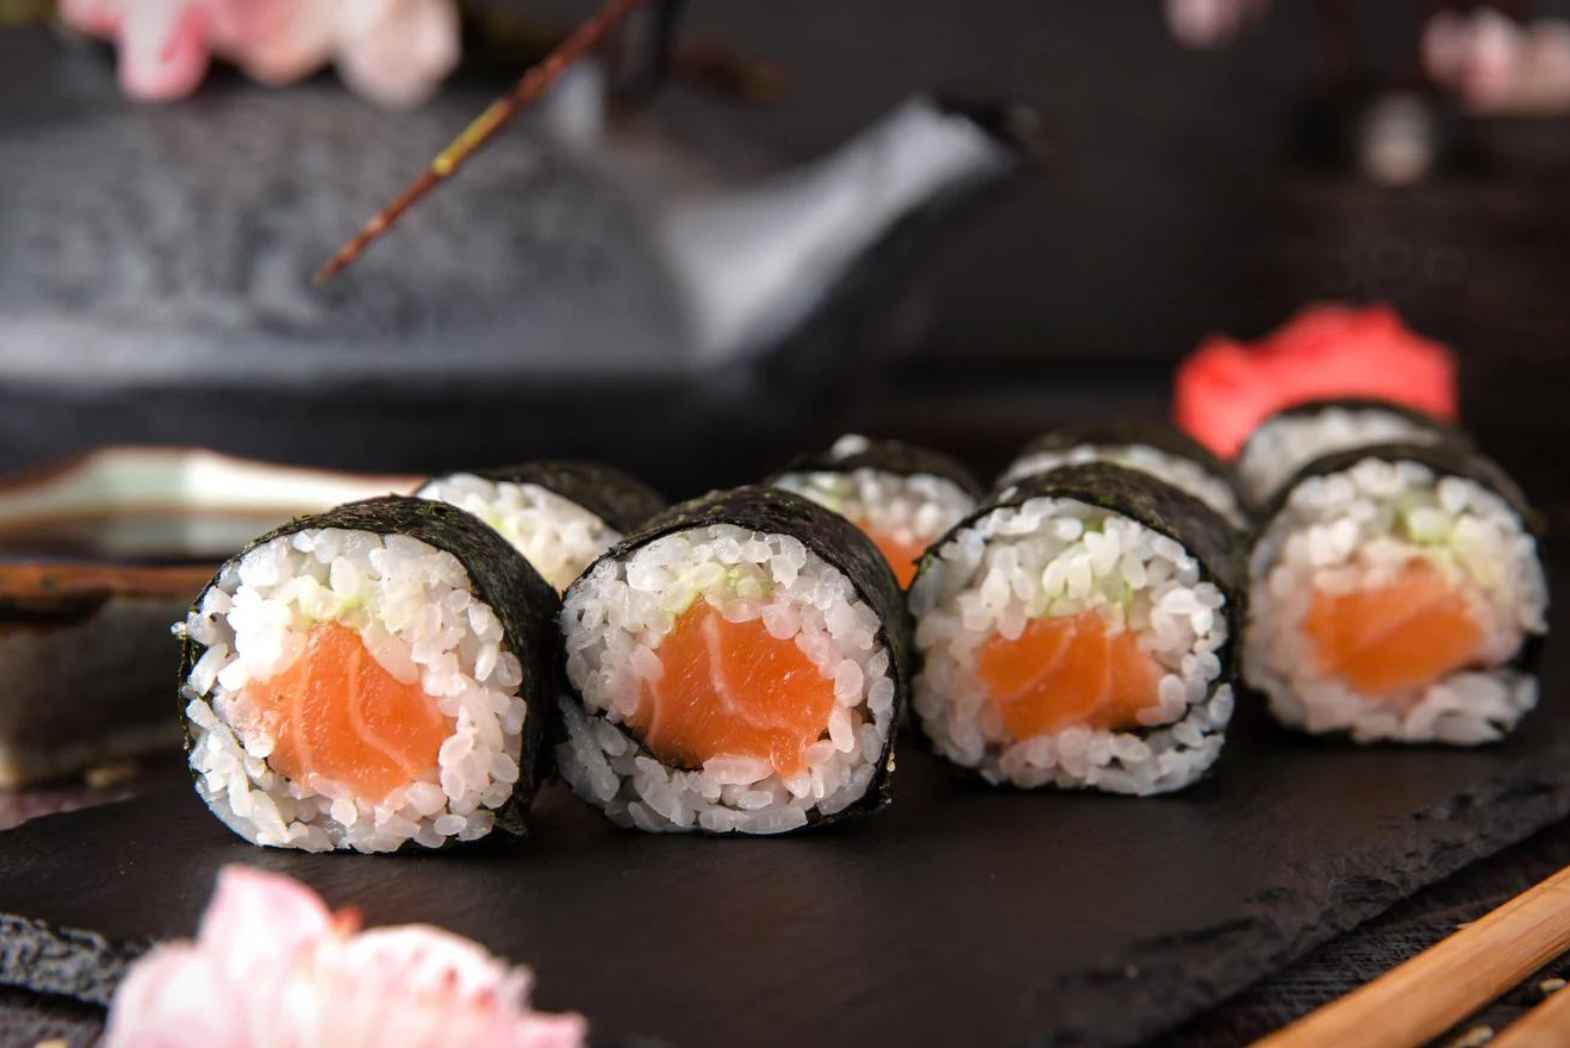 How To Make Sushi: Easy Maki Rolls Step-By-Step